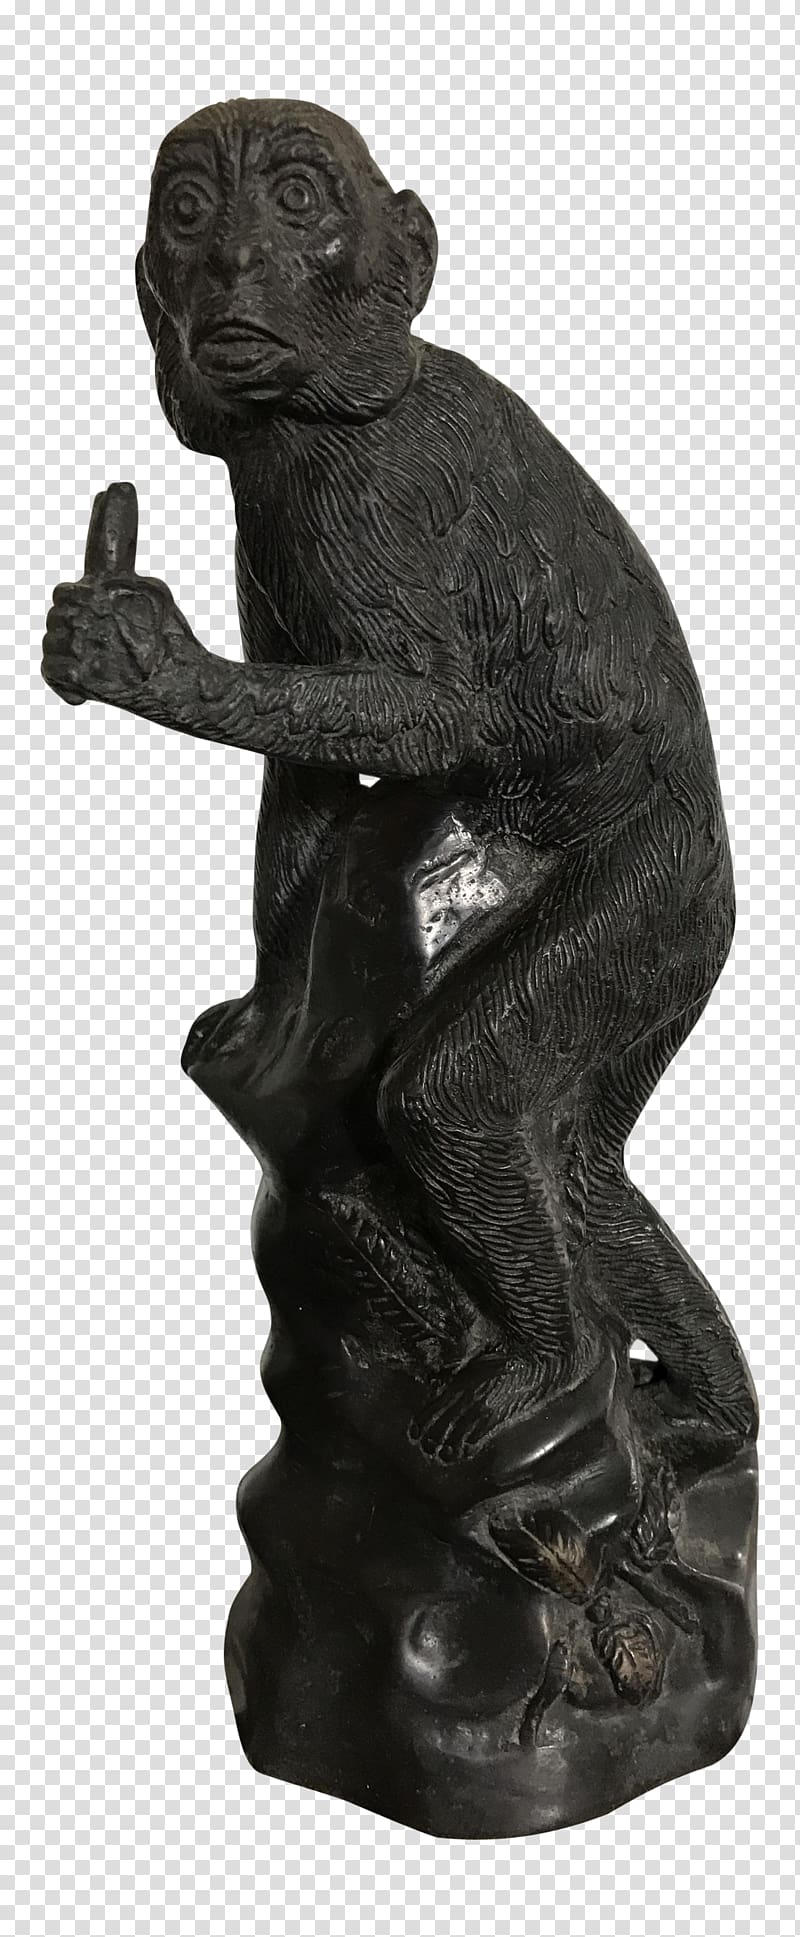 Bronze sculpture Macaque Stone carving, others transparent background PNG clipart